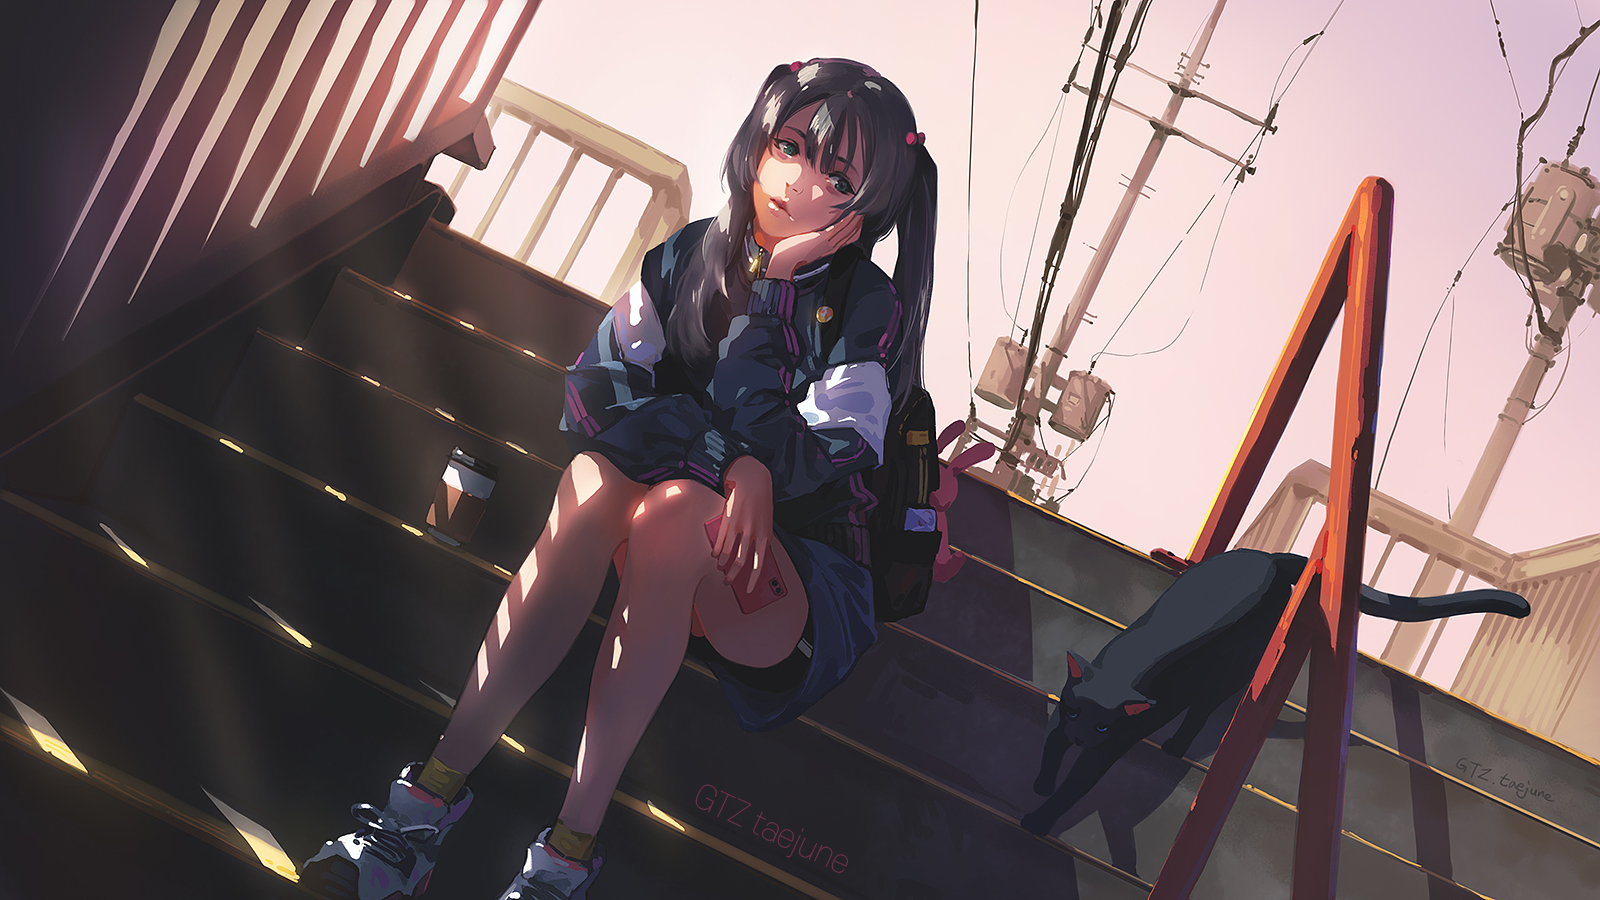 Anime 1600x900 anime anime girls brunette bangs twintails long hair jacket sitting stairs touching face looking away cellphone cats sky backpacks portrait artwork drawing digital art illustration Taejune Kim